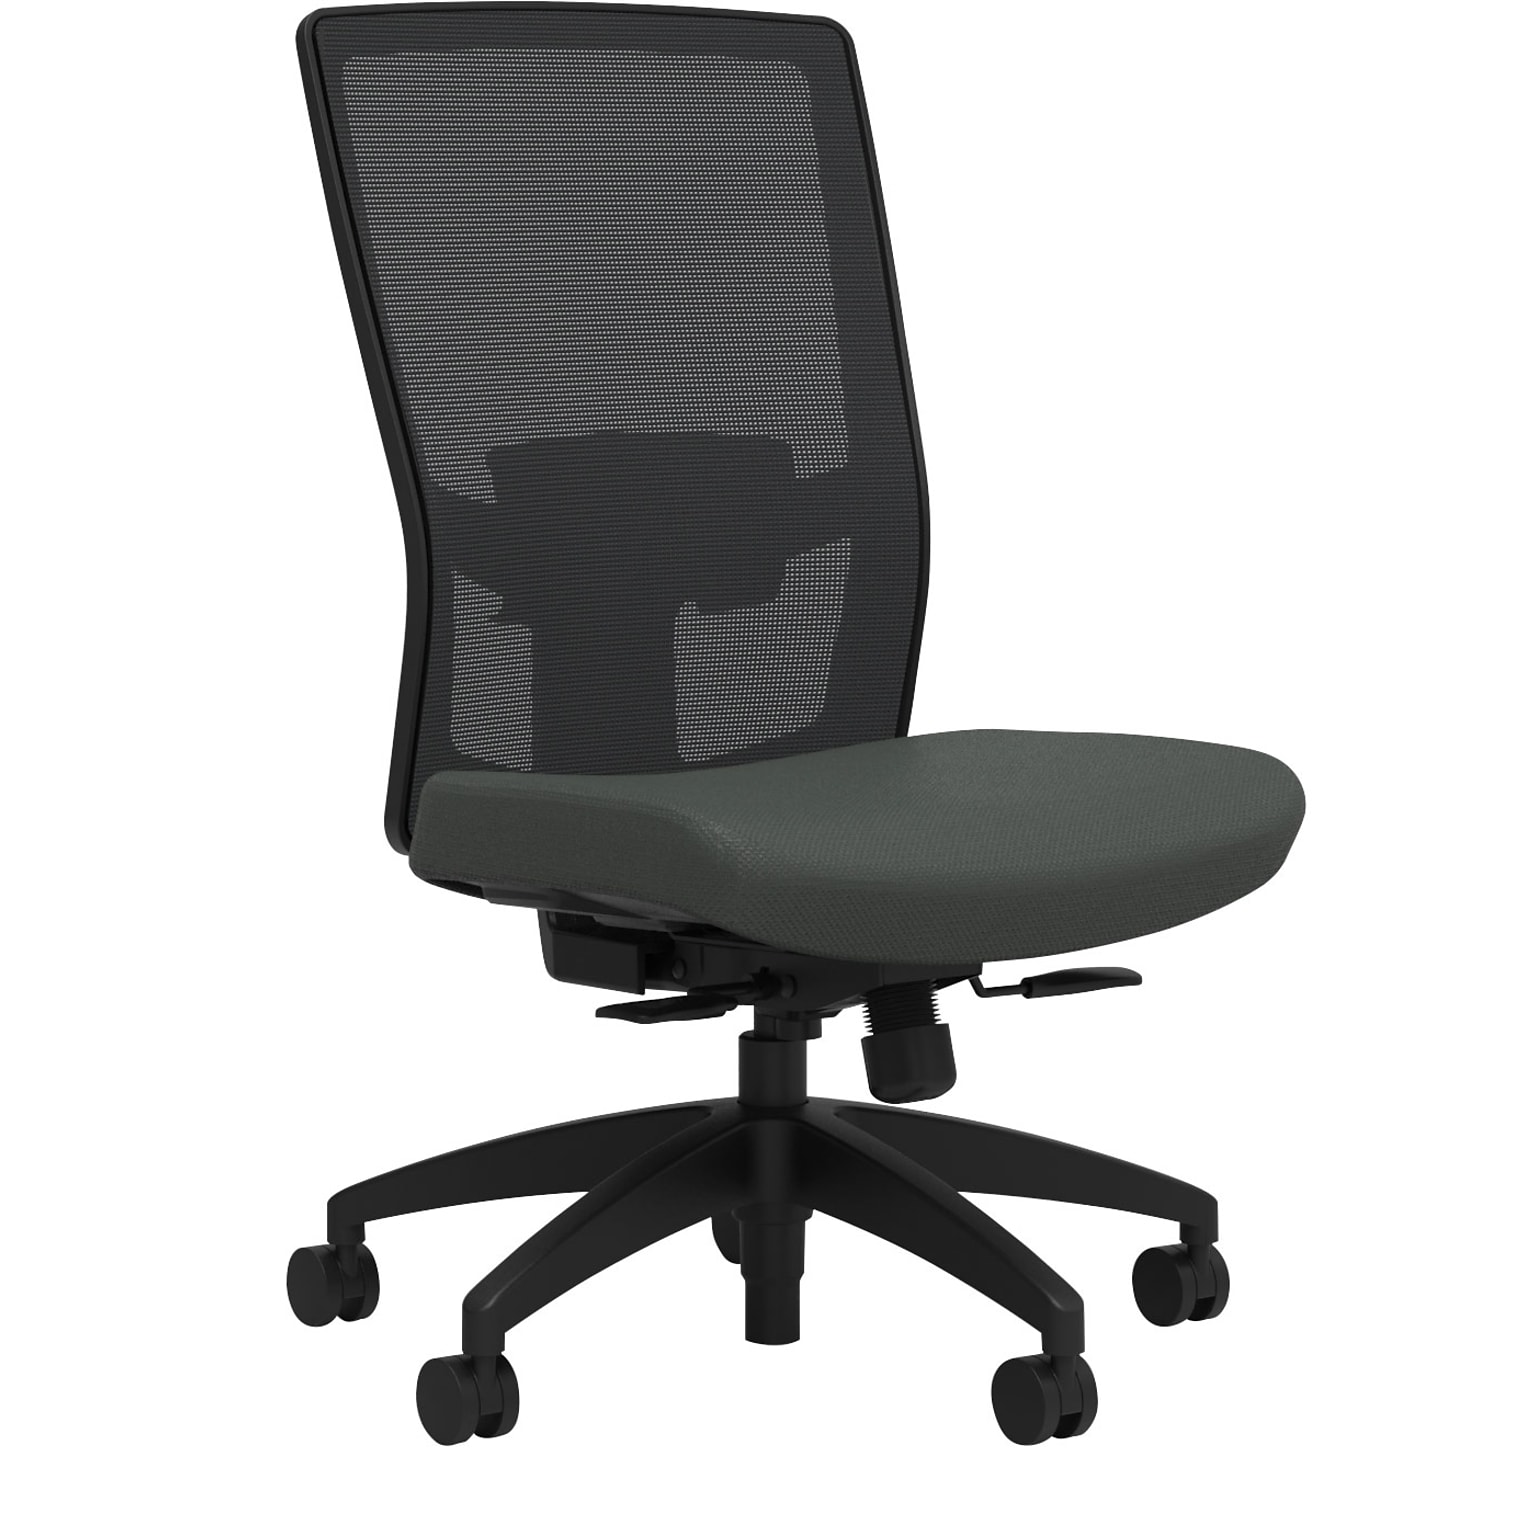 Union & Scale Workplace2.0™ Fabric Task Chair, Iron Ore, Adjustable Lumbar, Armless, Synchro Seat Slide